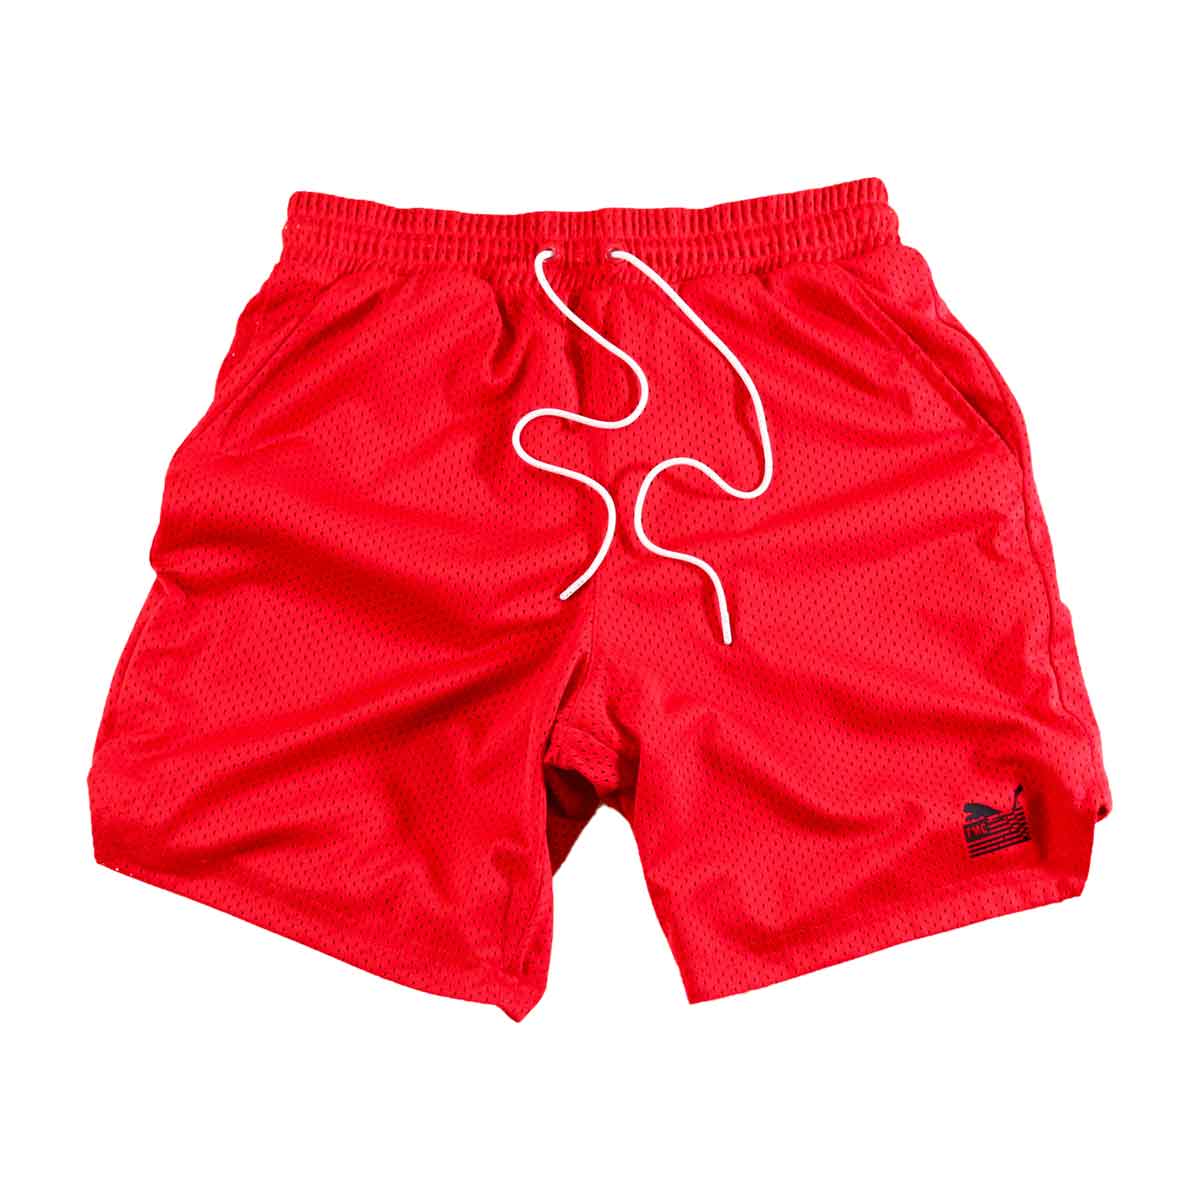 PUMA x TMC Everyday Hussle Collection Mesh Shorts - Red